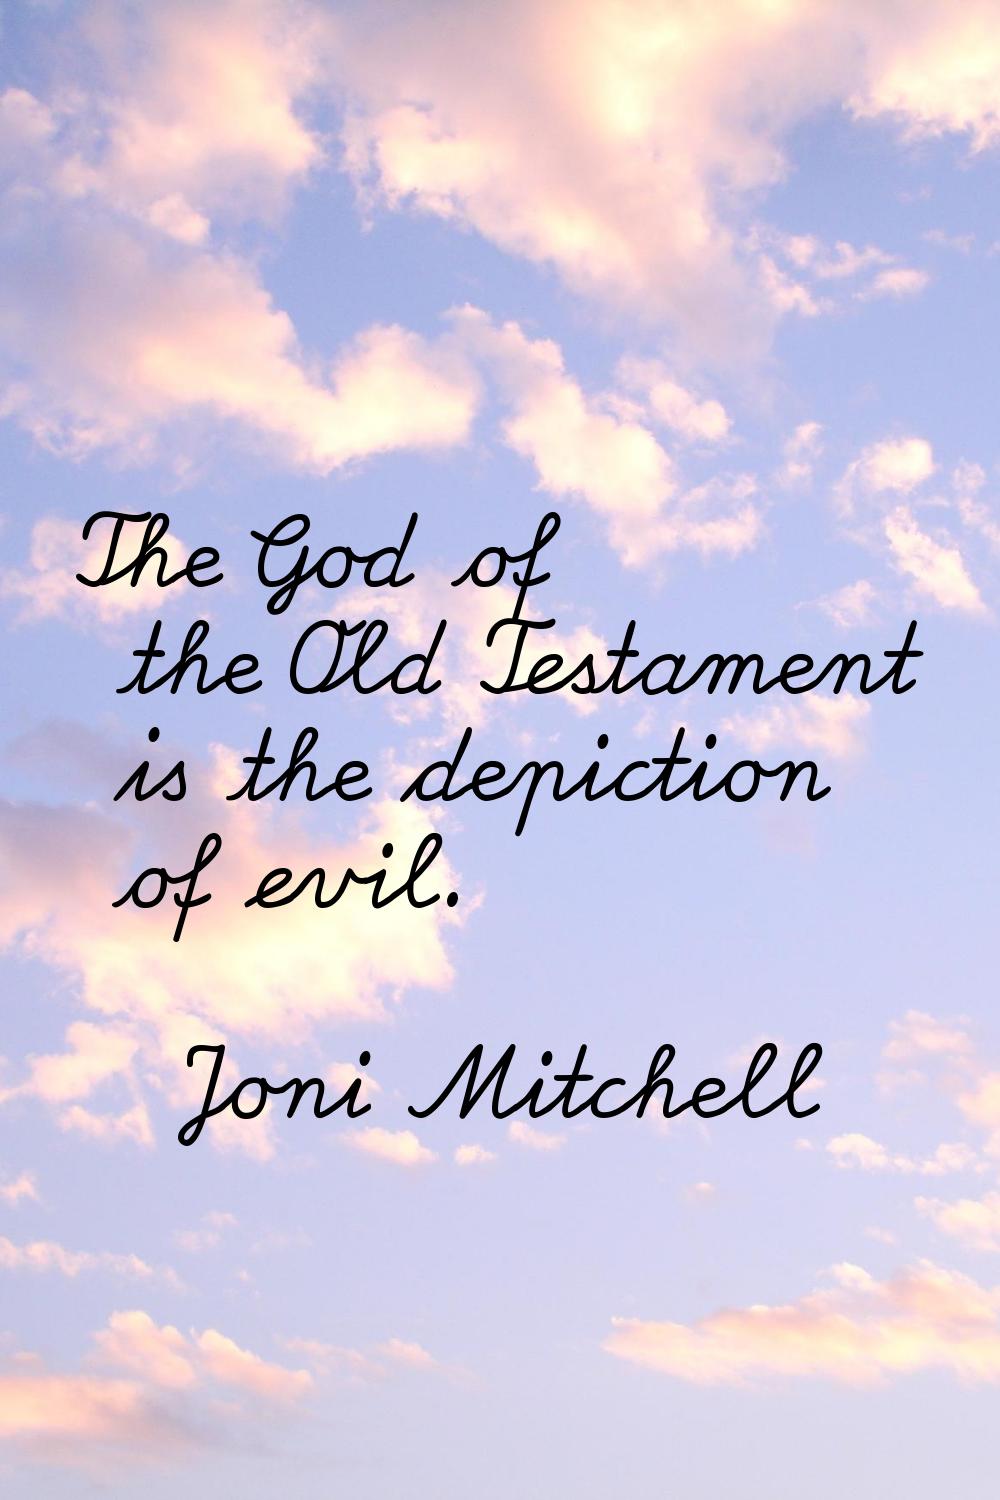 The God of the Old Testament is the depiction of evil.